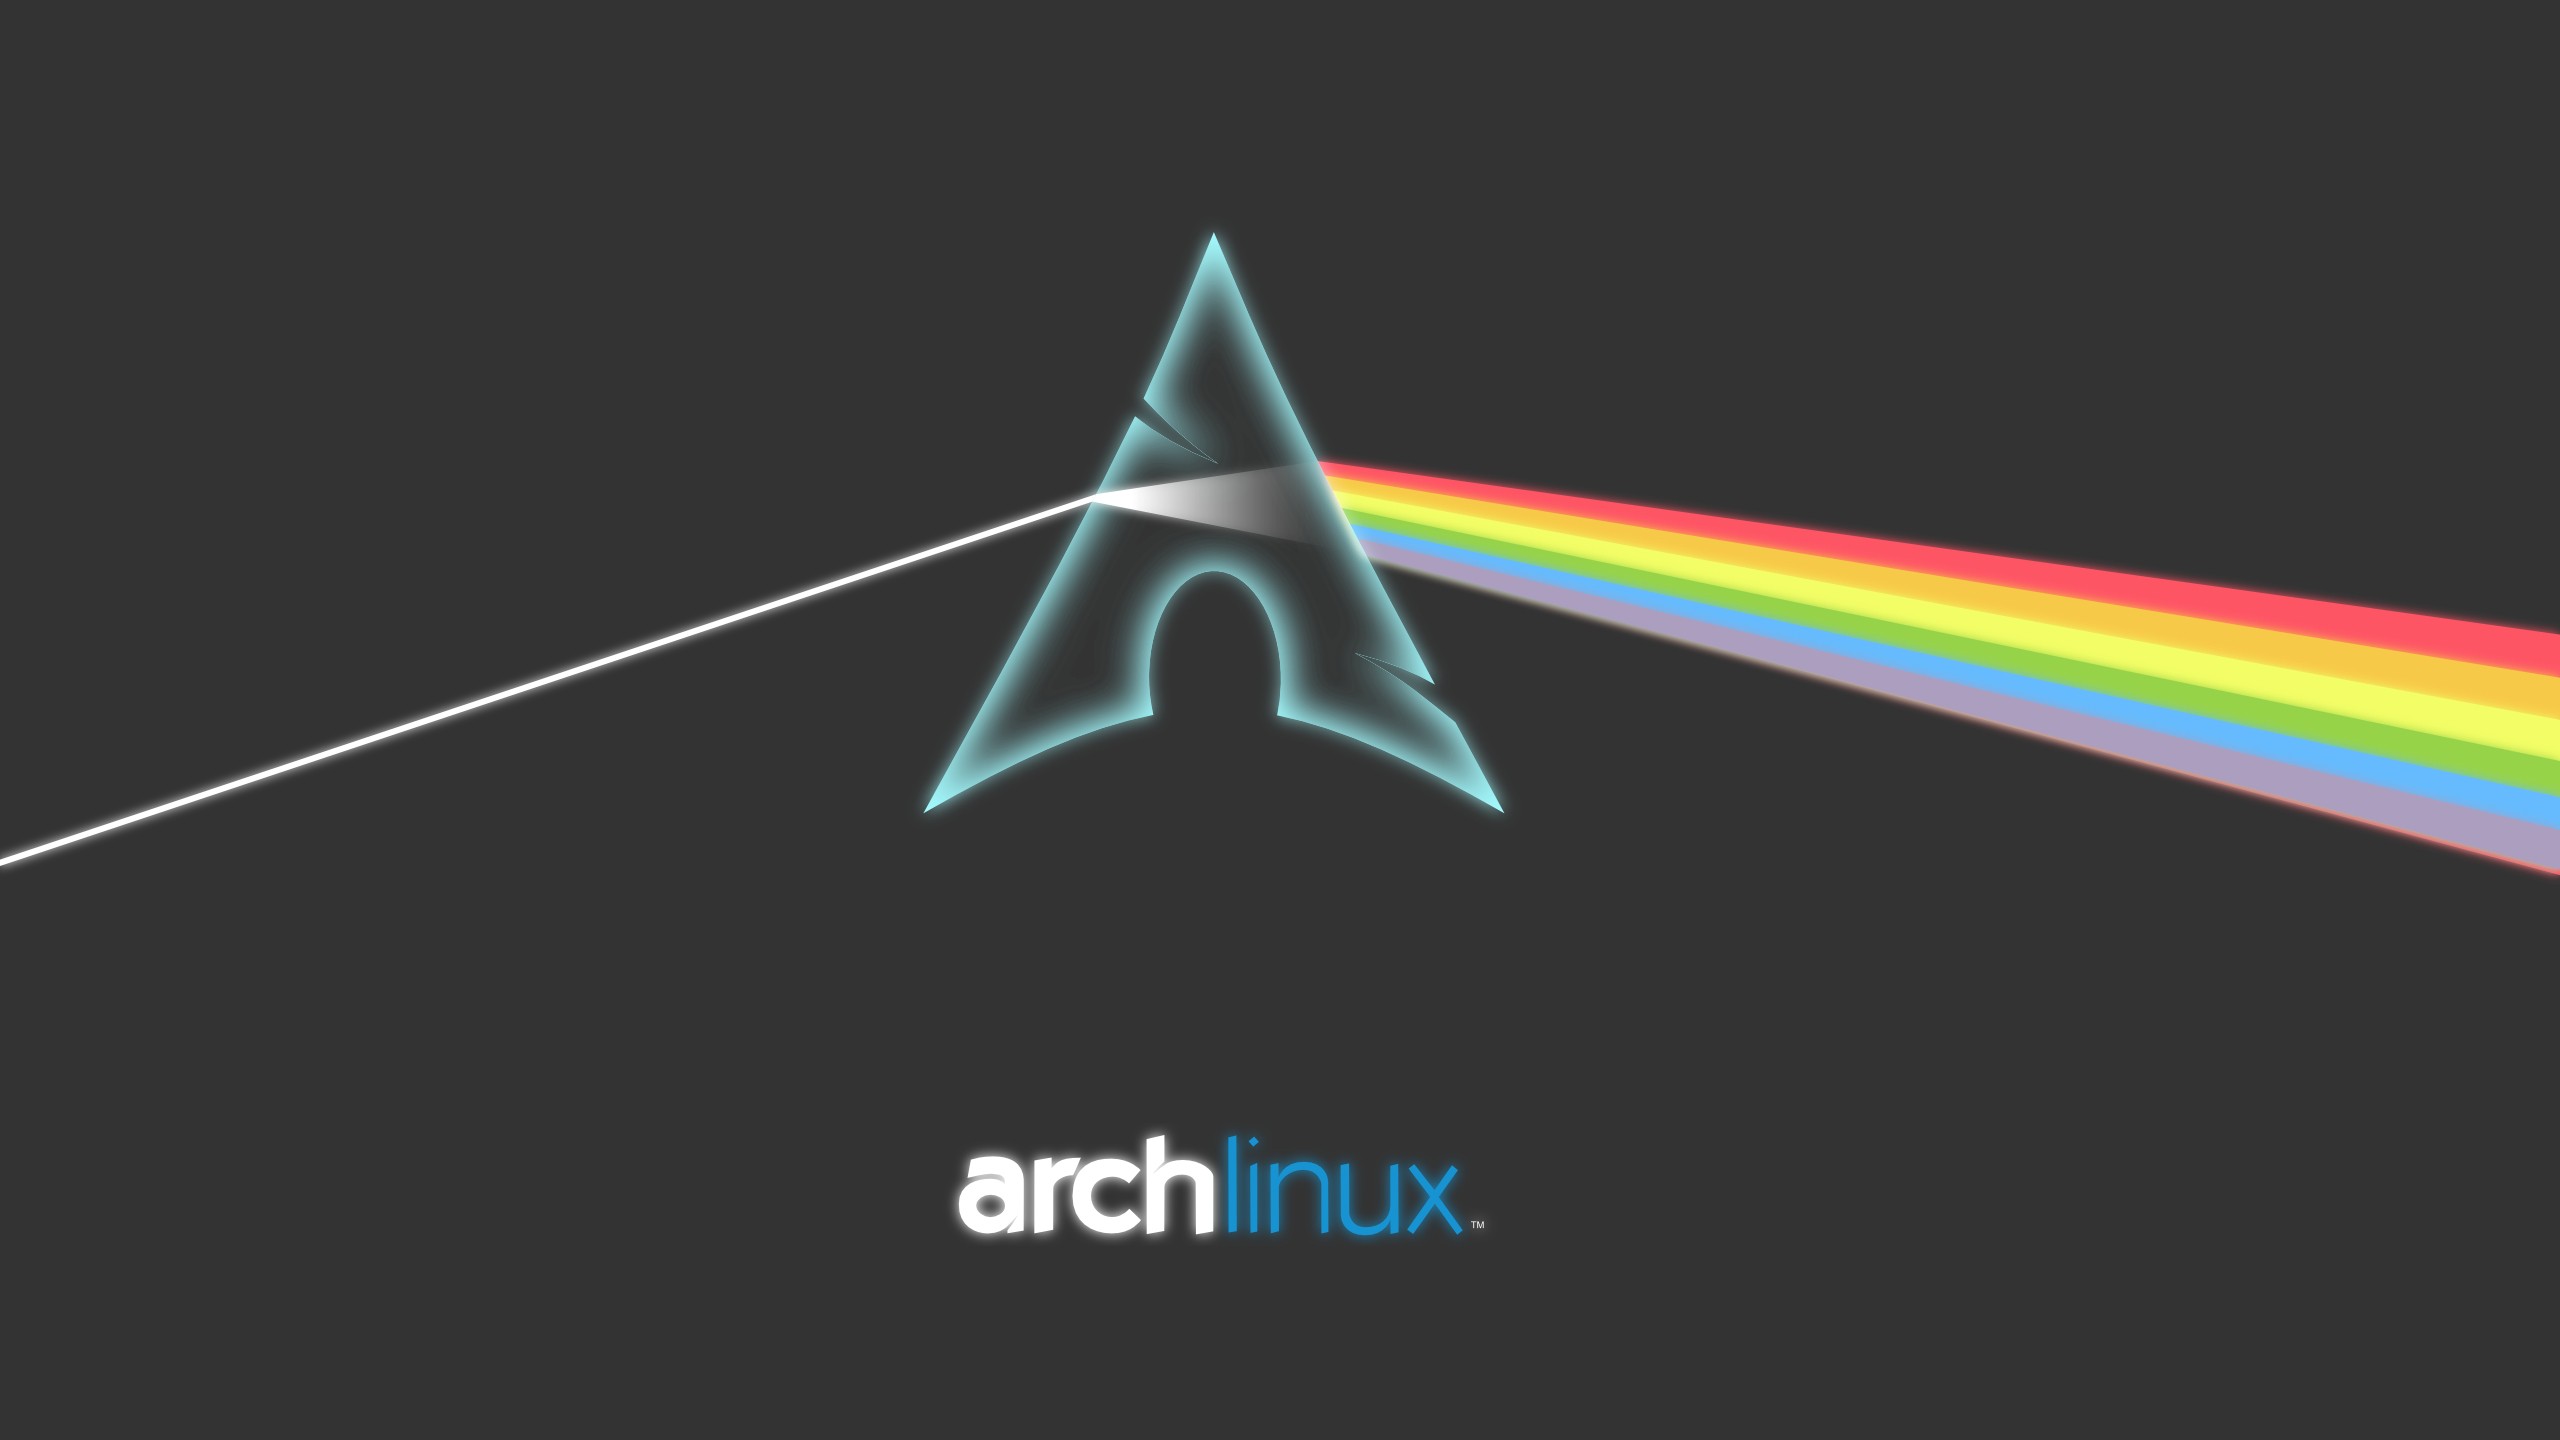 General 2560x1440 Arch Linux Linux Pink Floyd logo simple background operating system